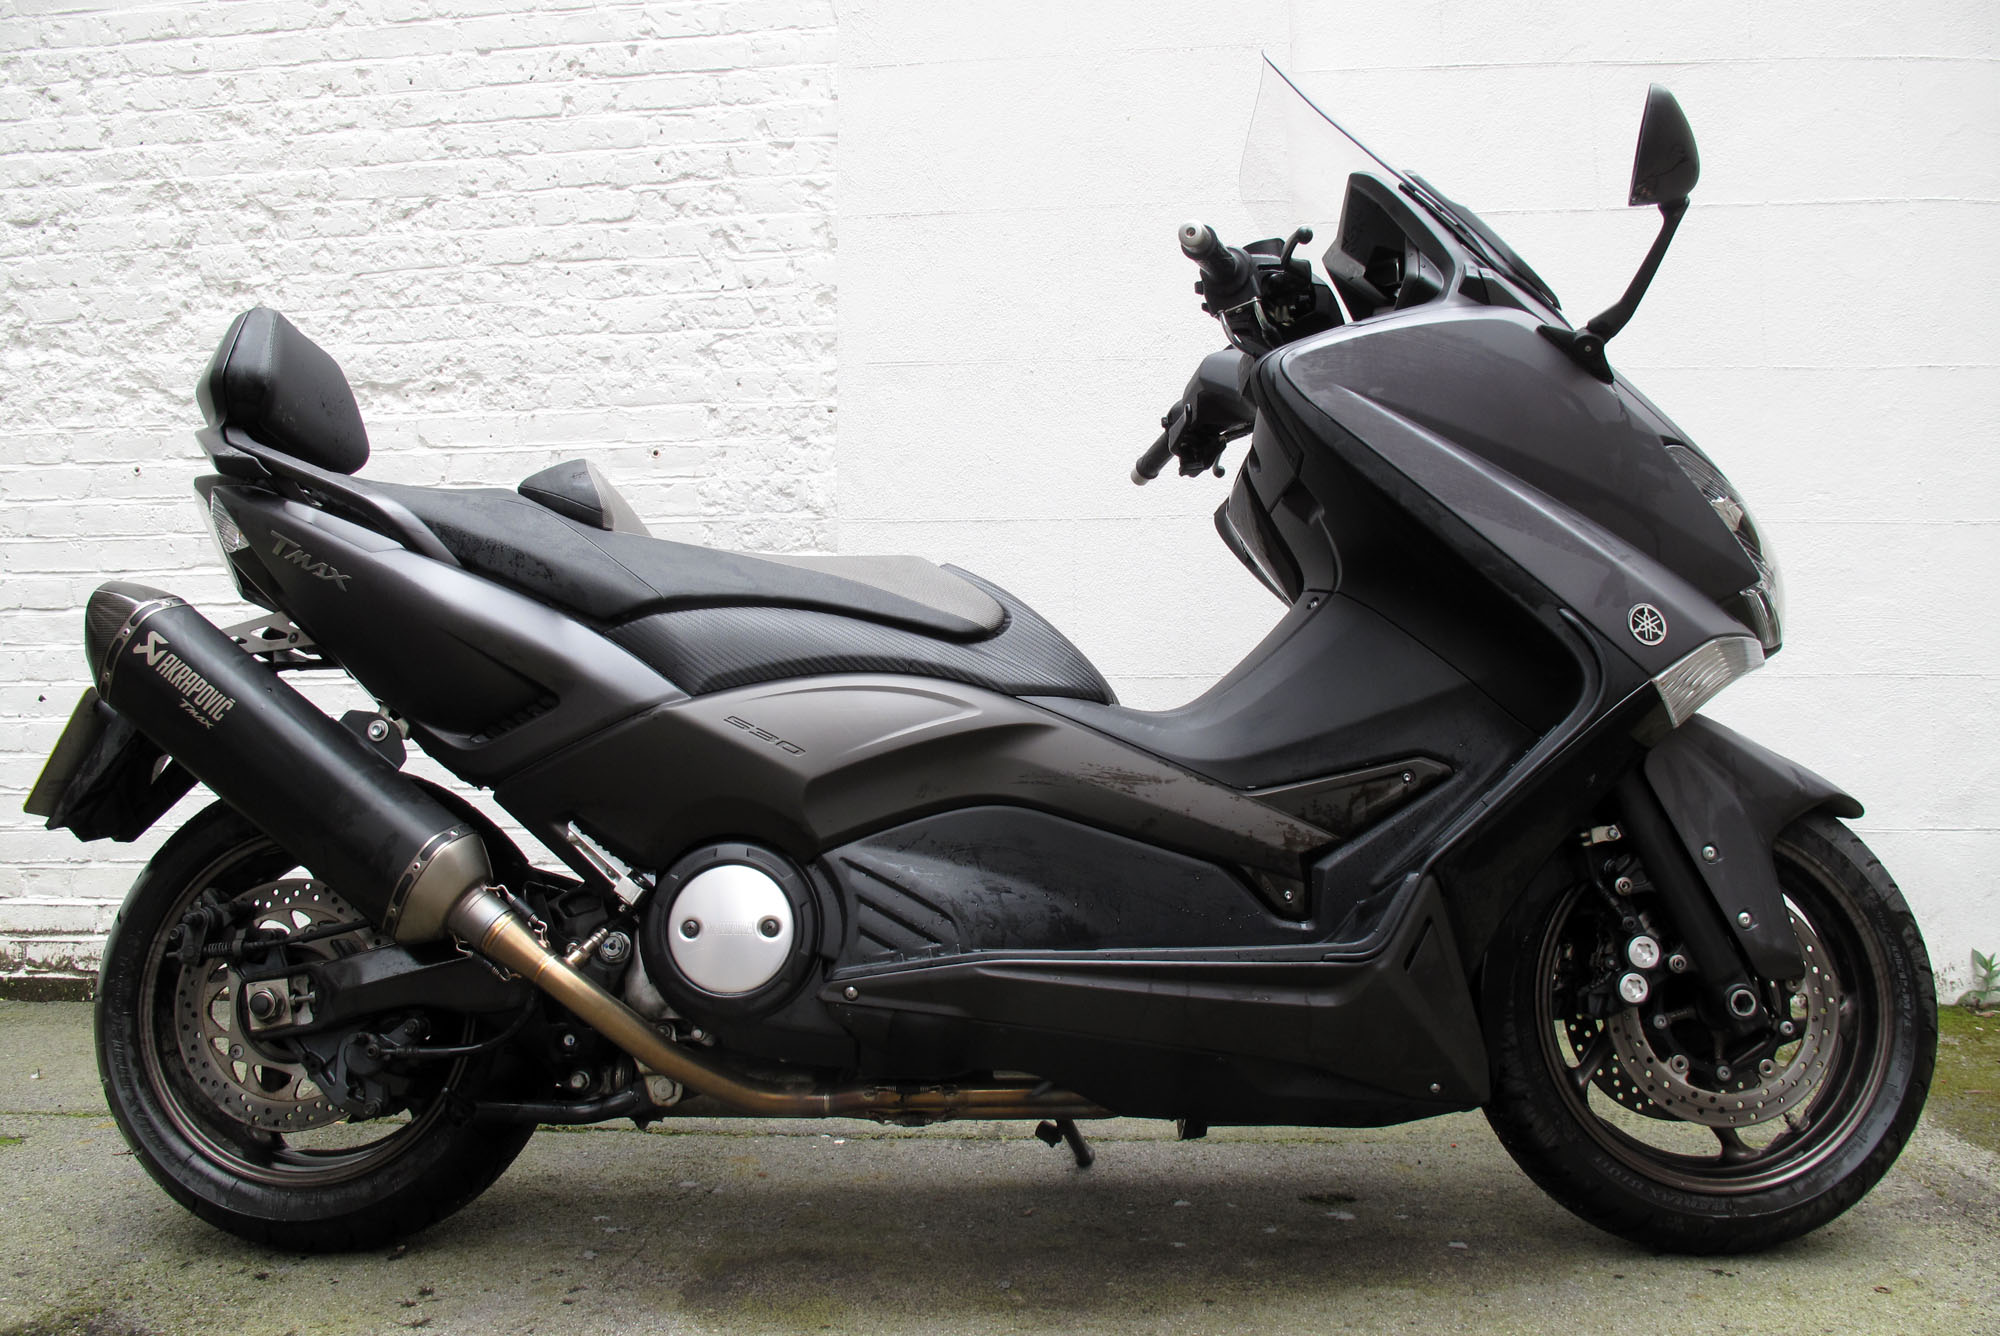 First Ride: 2013 Yamaha TMAX Black Max 530 review